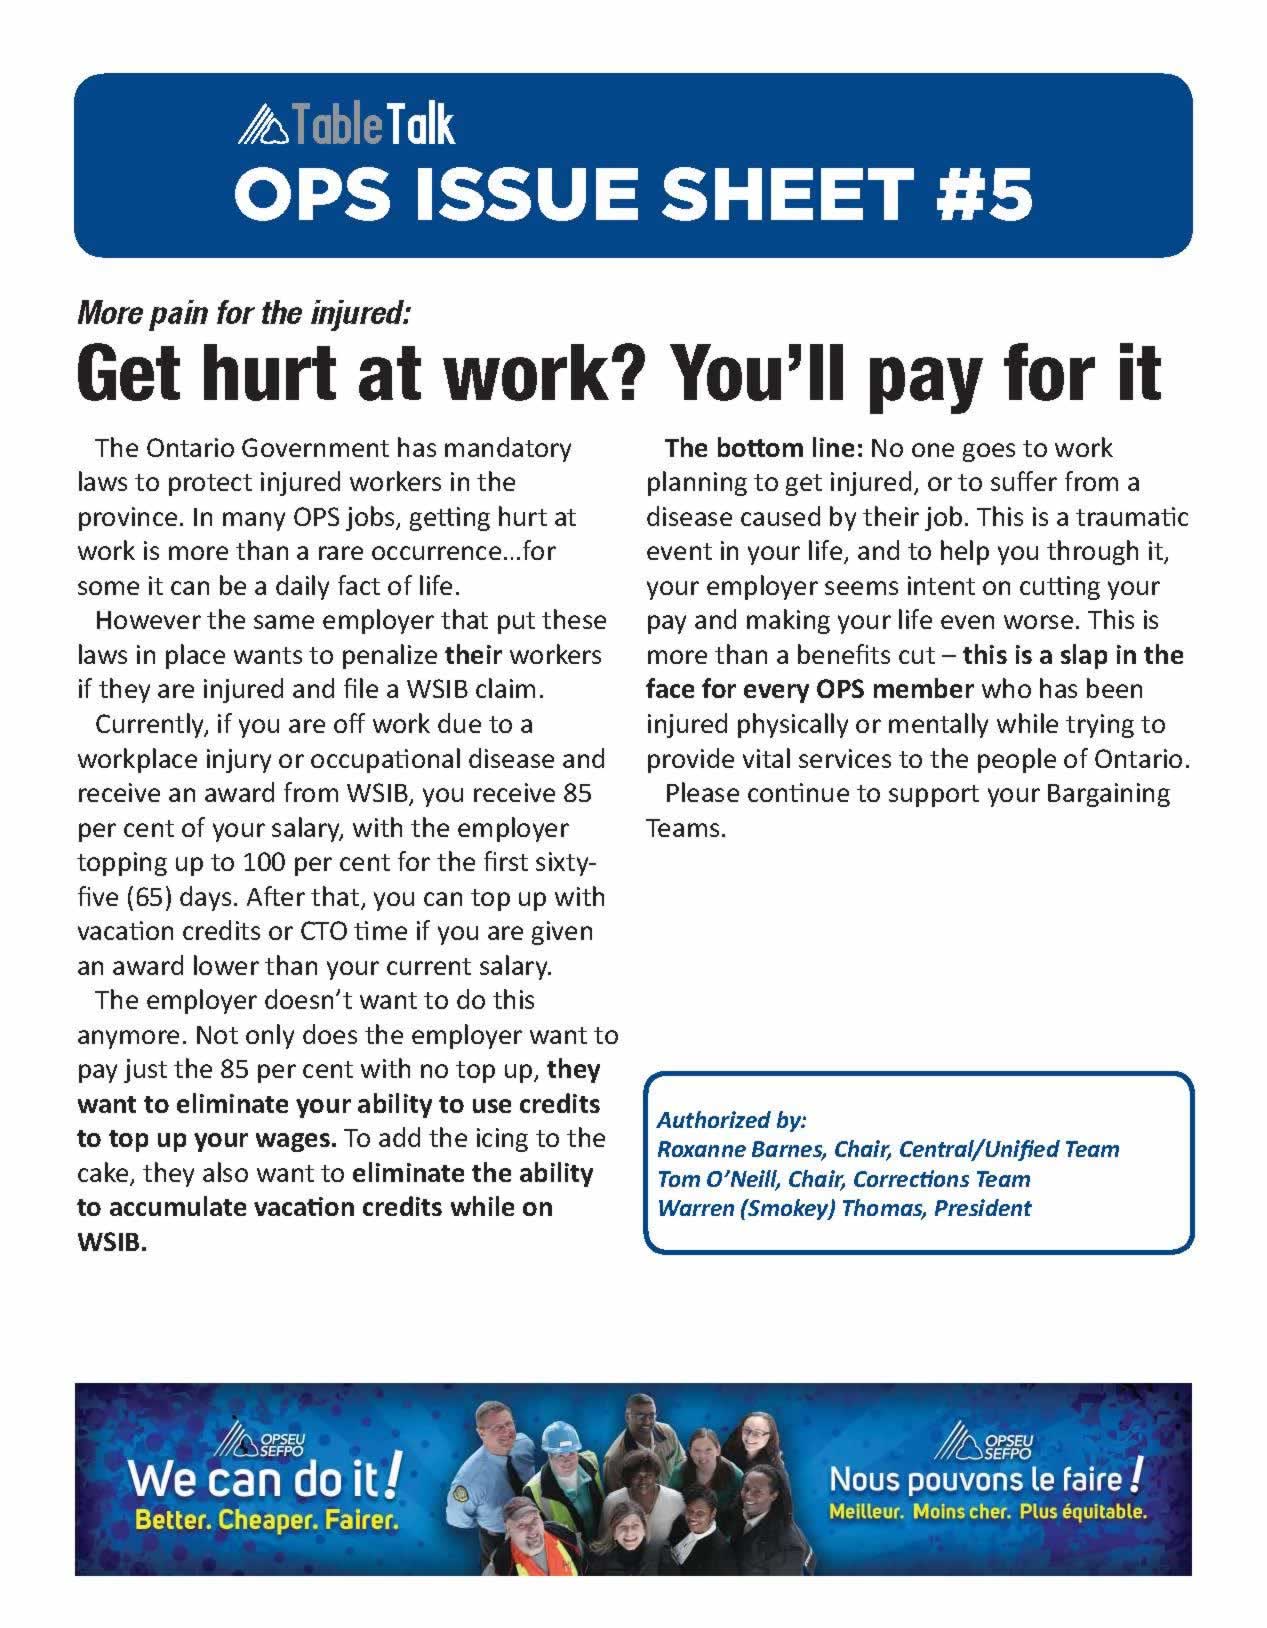 OPS Issue Sheet. More pain for the injured: get hurt at work? you'll pay for it